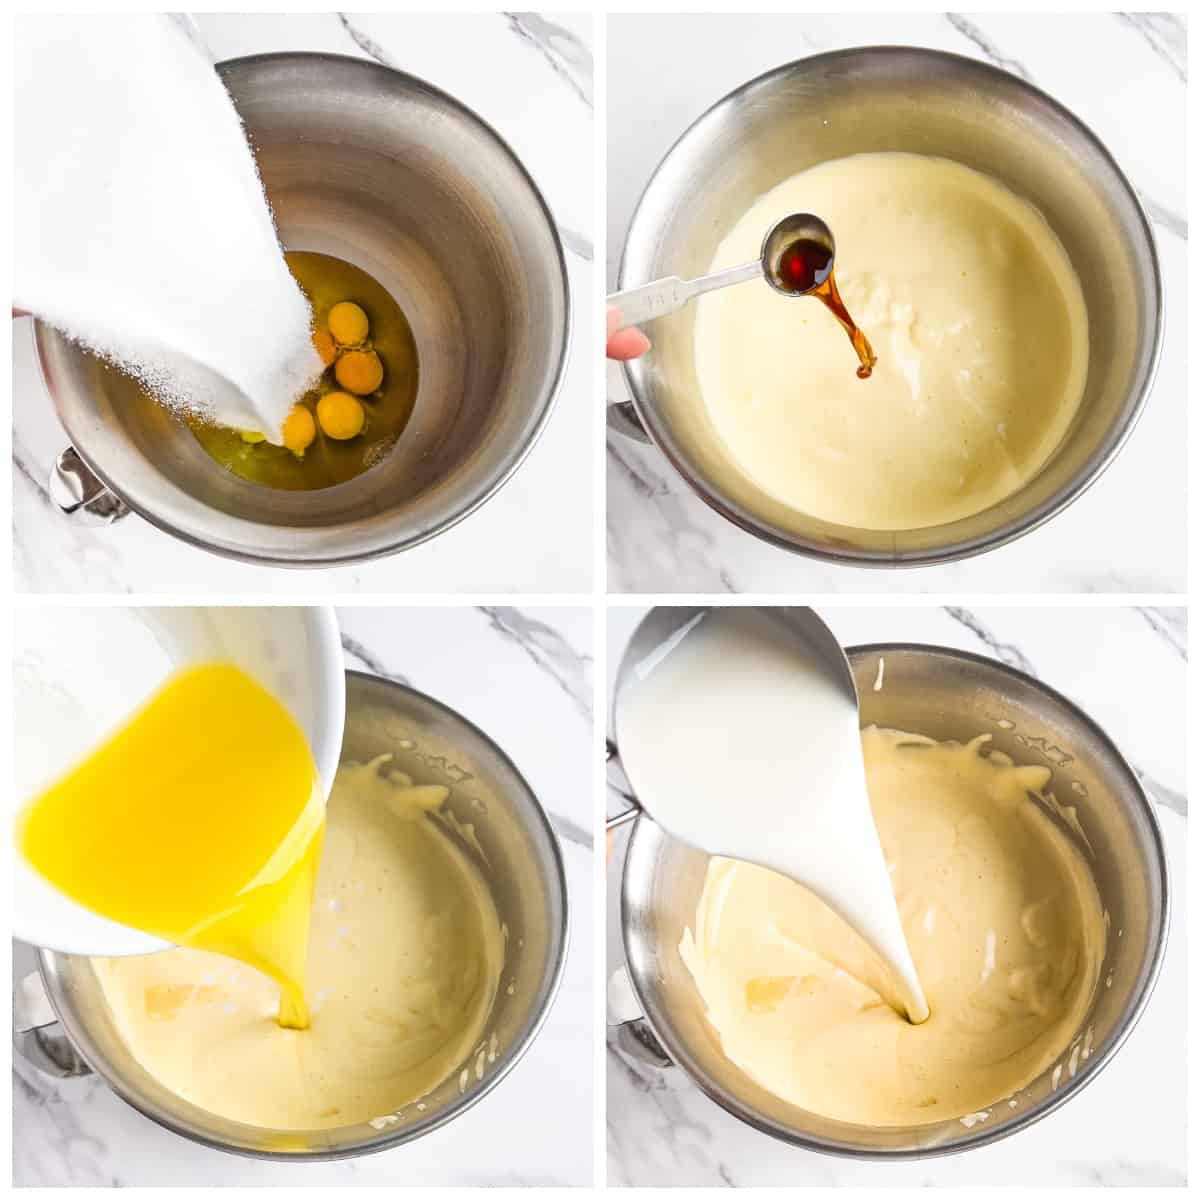 Turn the mixer speed down to medium/low and add your pure vanilla extract, melted butter, and your room temperature buttermilk, and make sure to take it out of the fridge ahead of time.